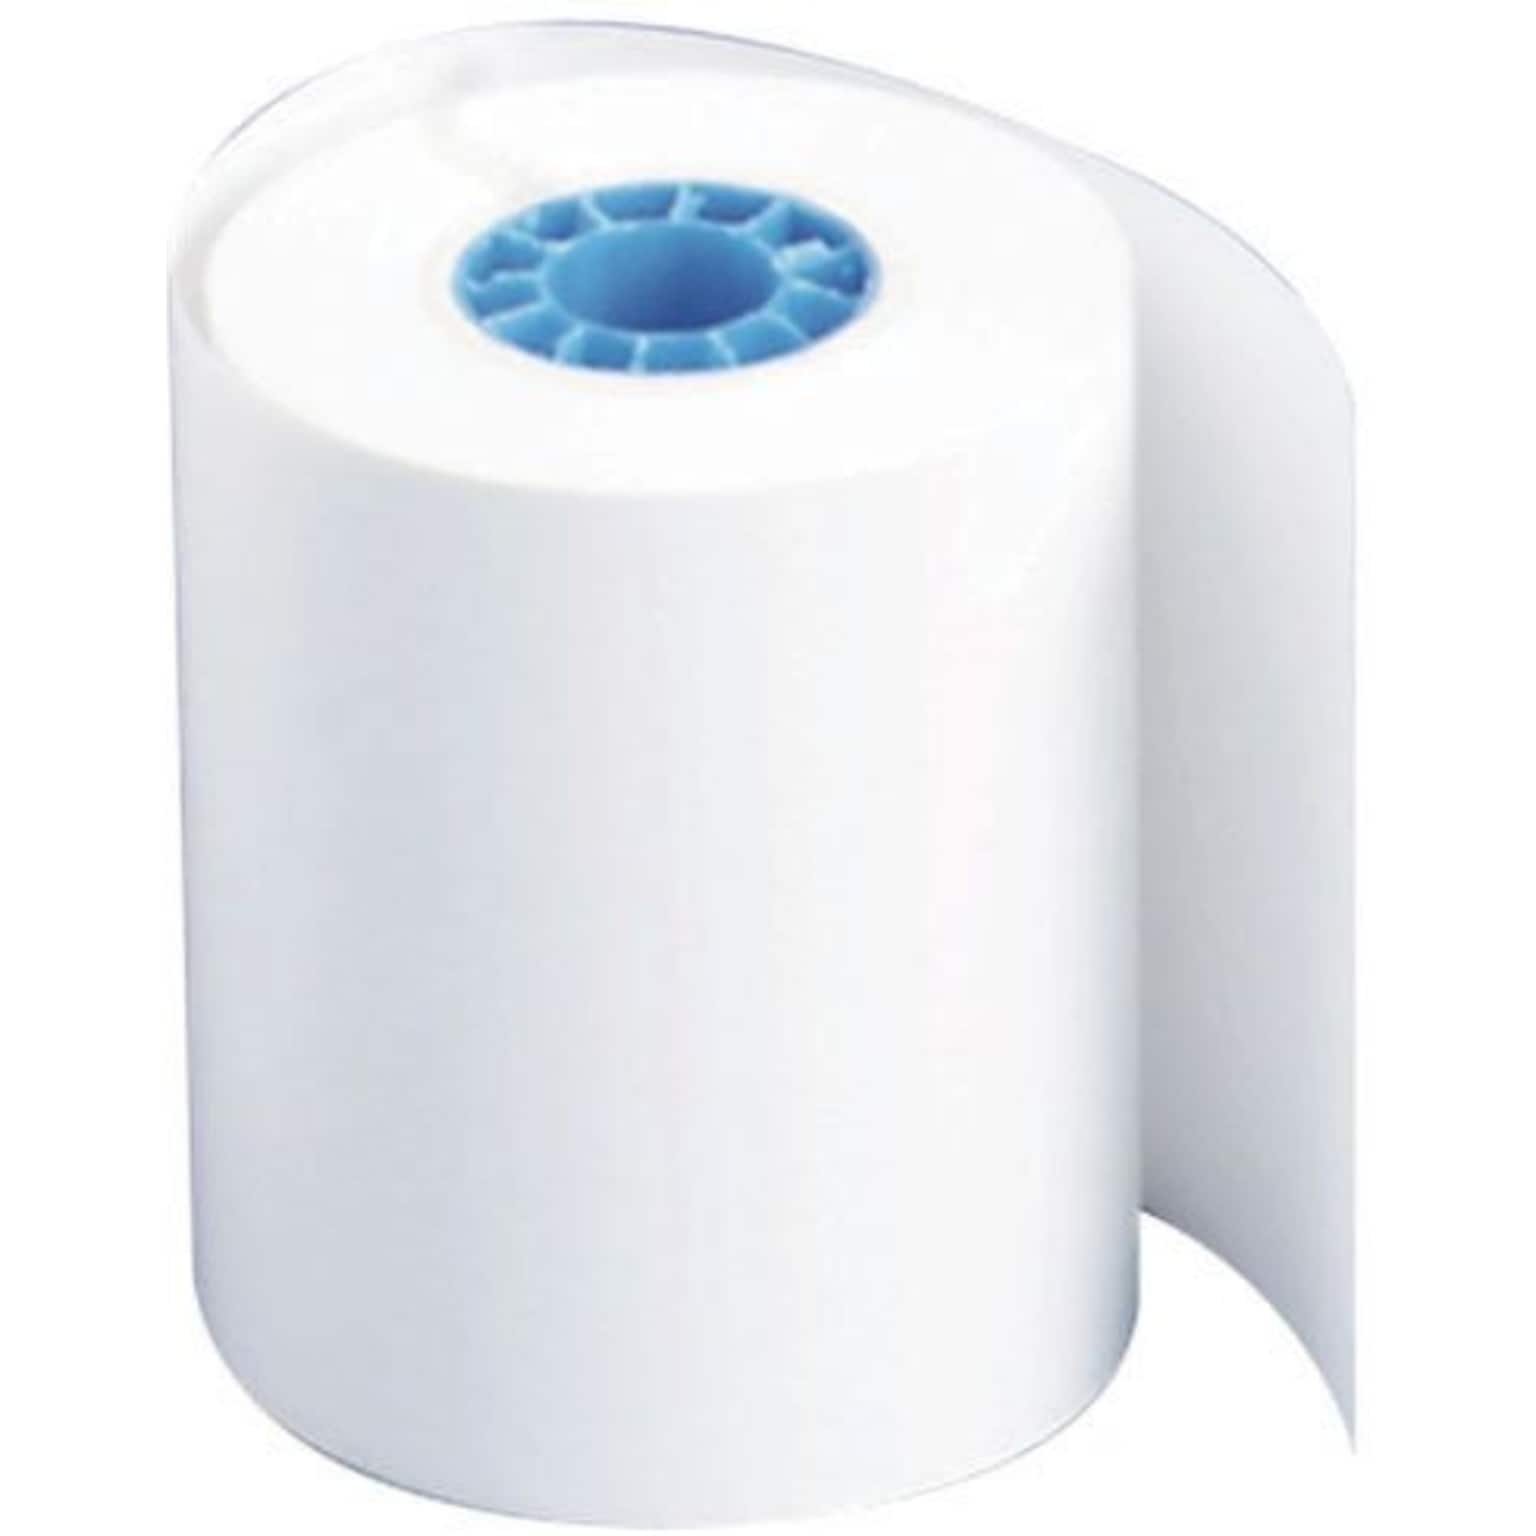 PM Tech Print Med/Lab Rolls, 1-Ply, 2 1/4 x 80, White, 12/Pack (PMC06370)